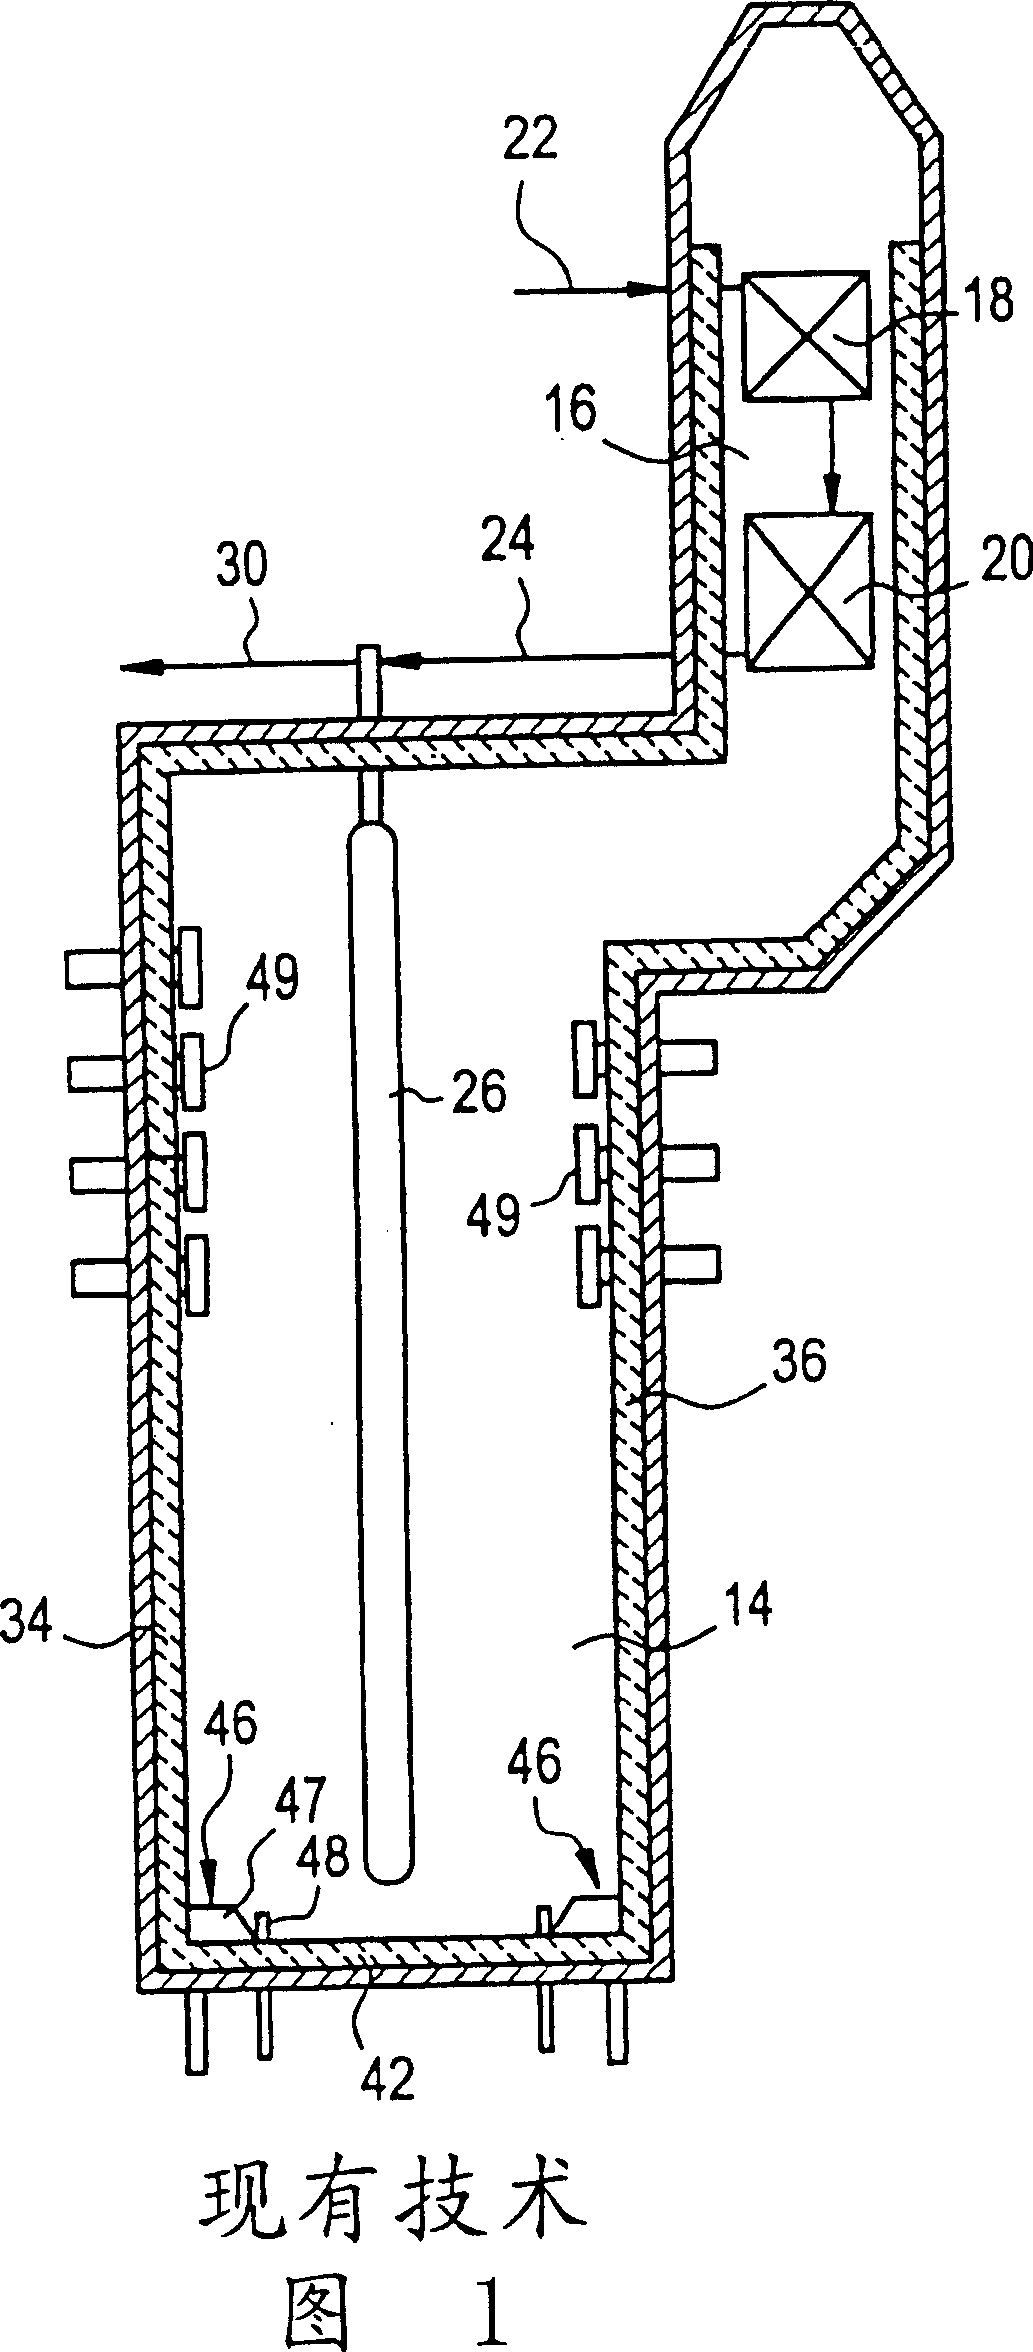 Pyrolysis heater with paired burner zoned firing system